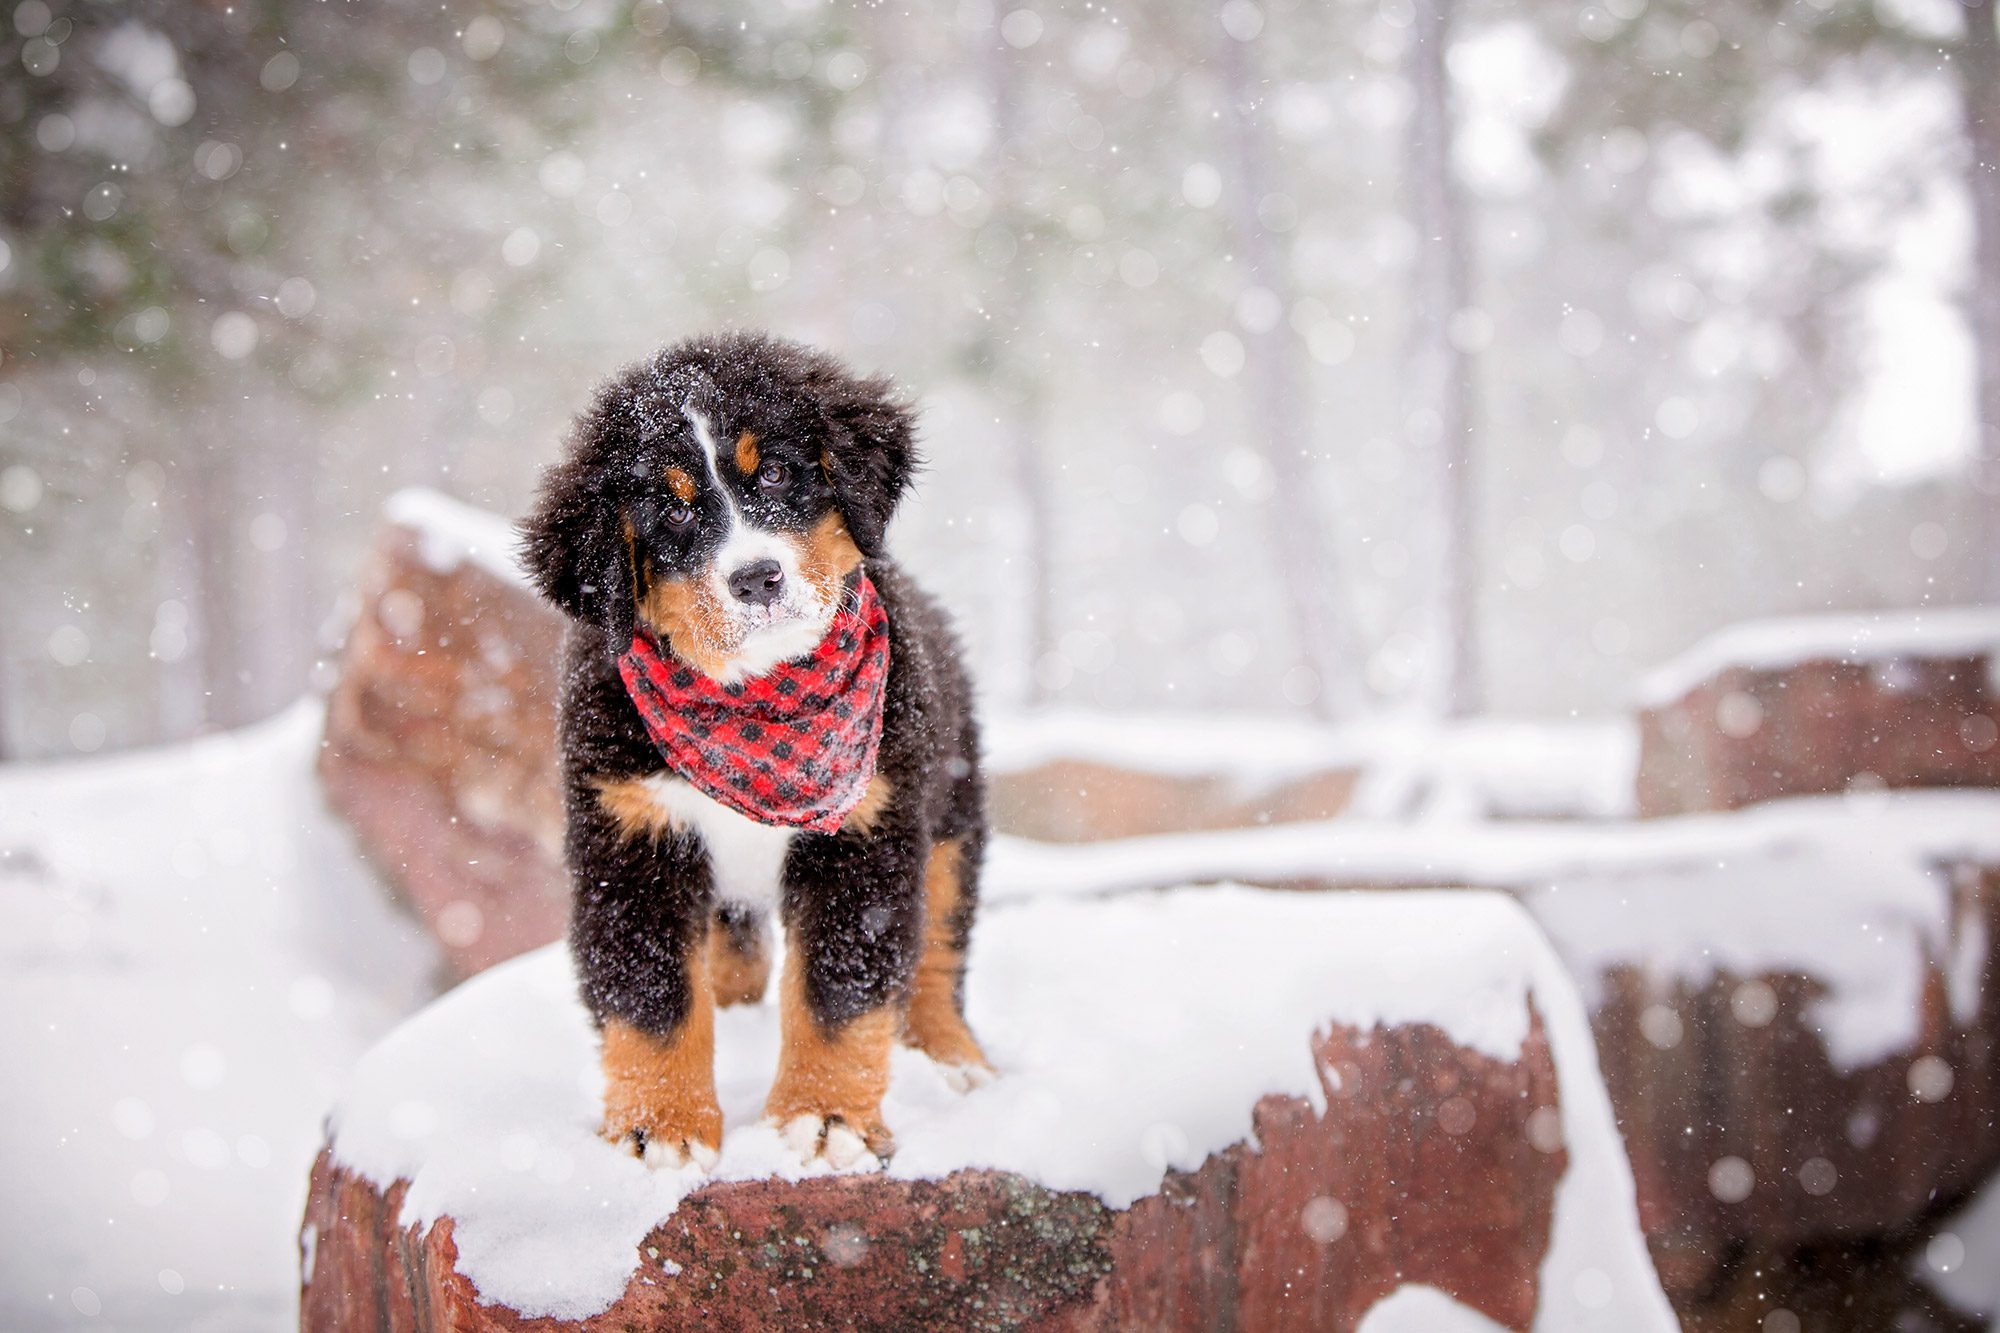 Bernese Mountain Dog in the snow